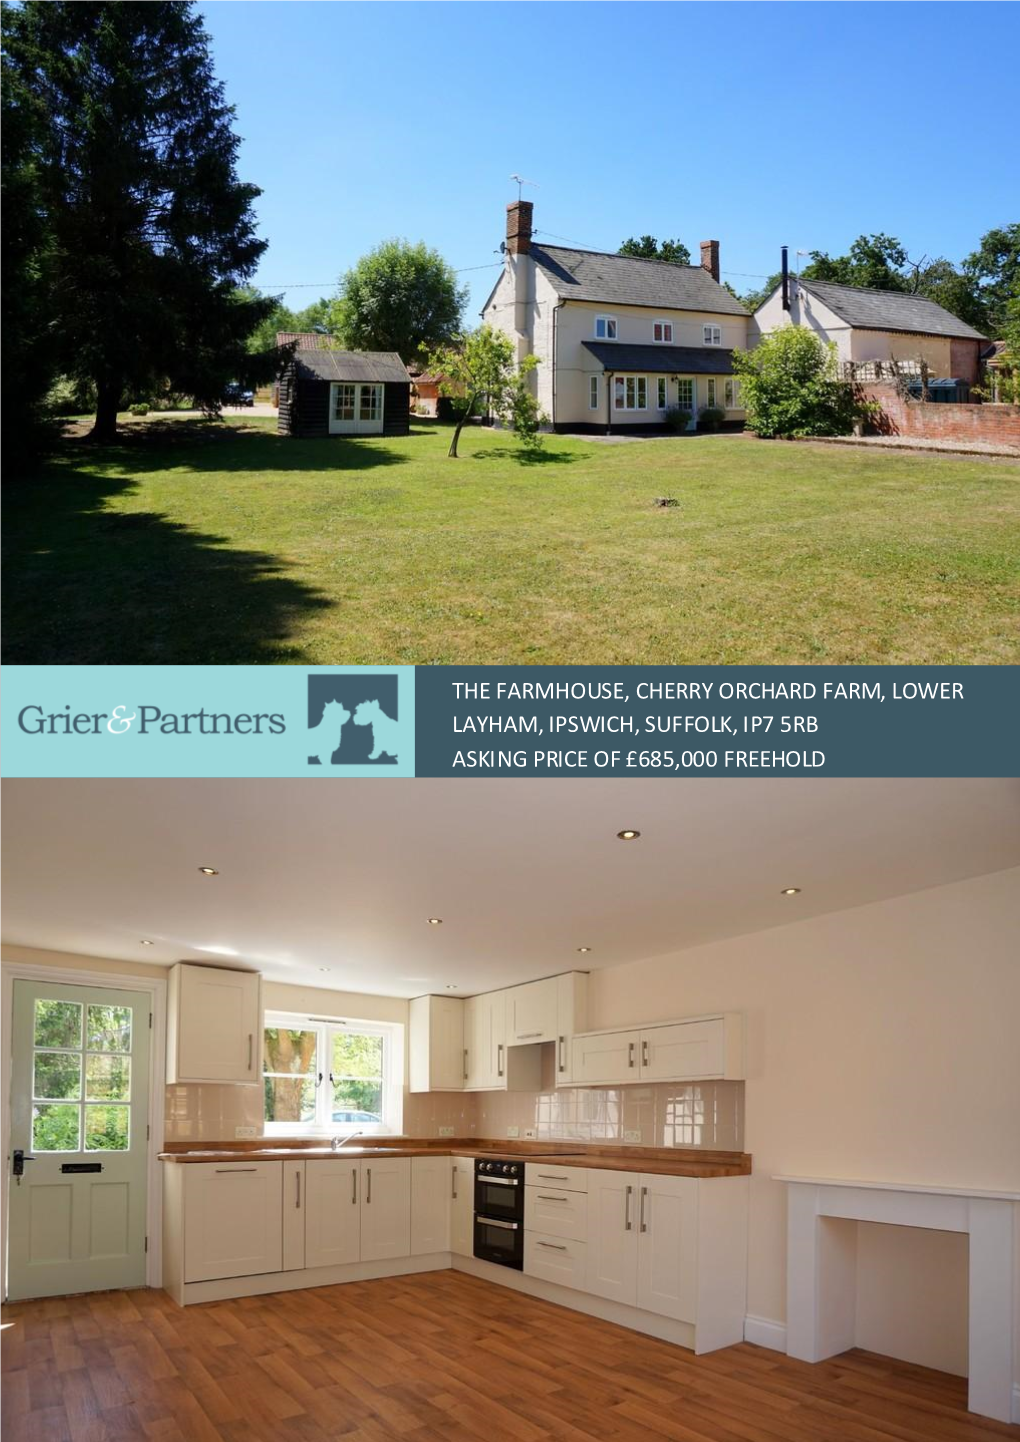 The Farmhouse, Cherry Orchard Farm, Lower Layham, Ipswich, Suffolk, Ip7 5Rb Asking Price of £685,000 Freehold